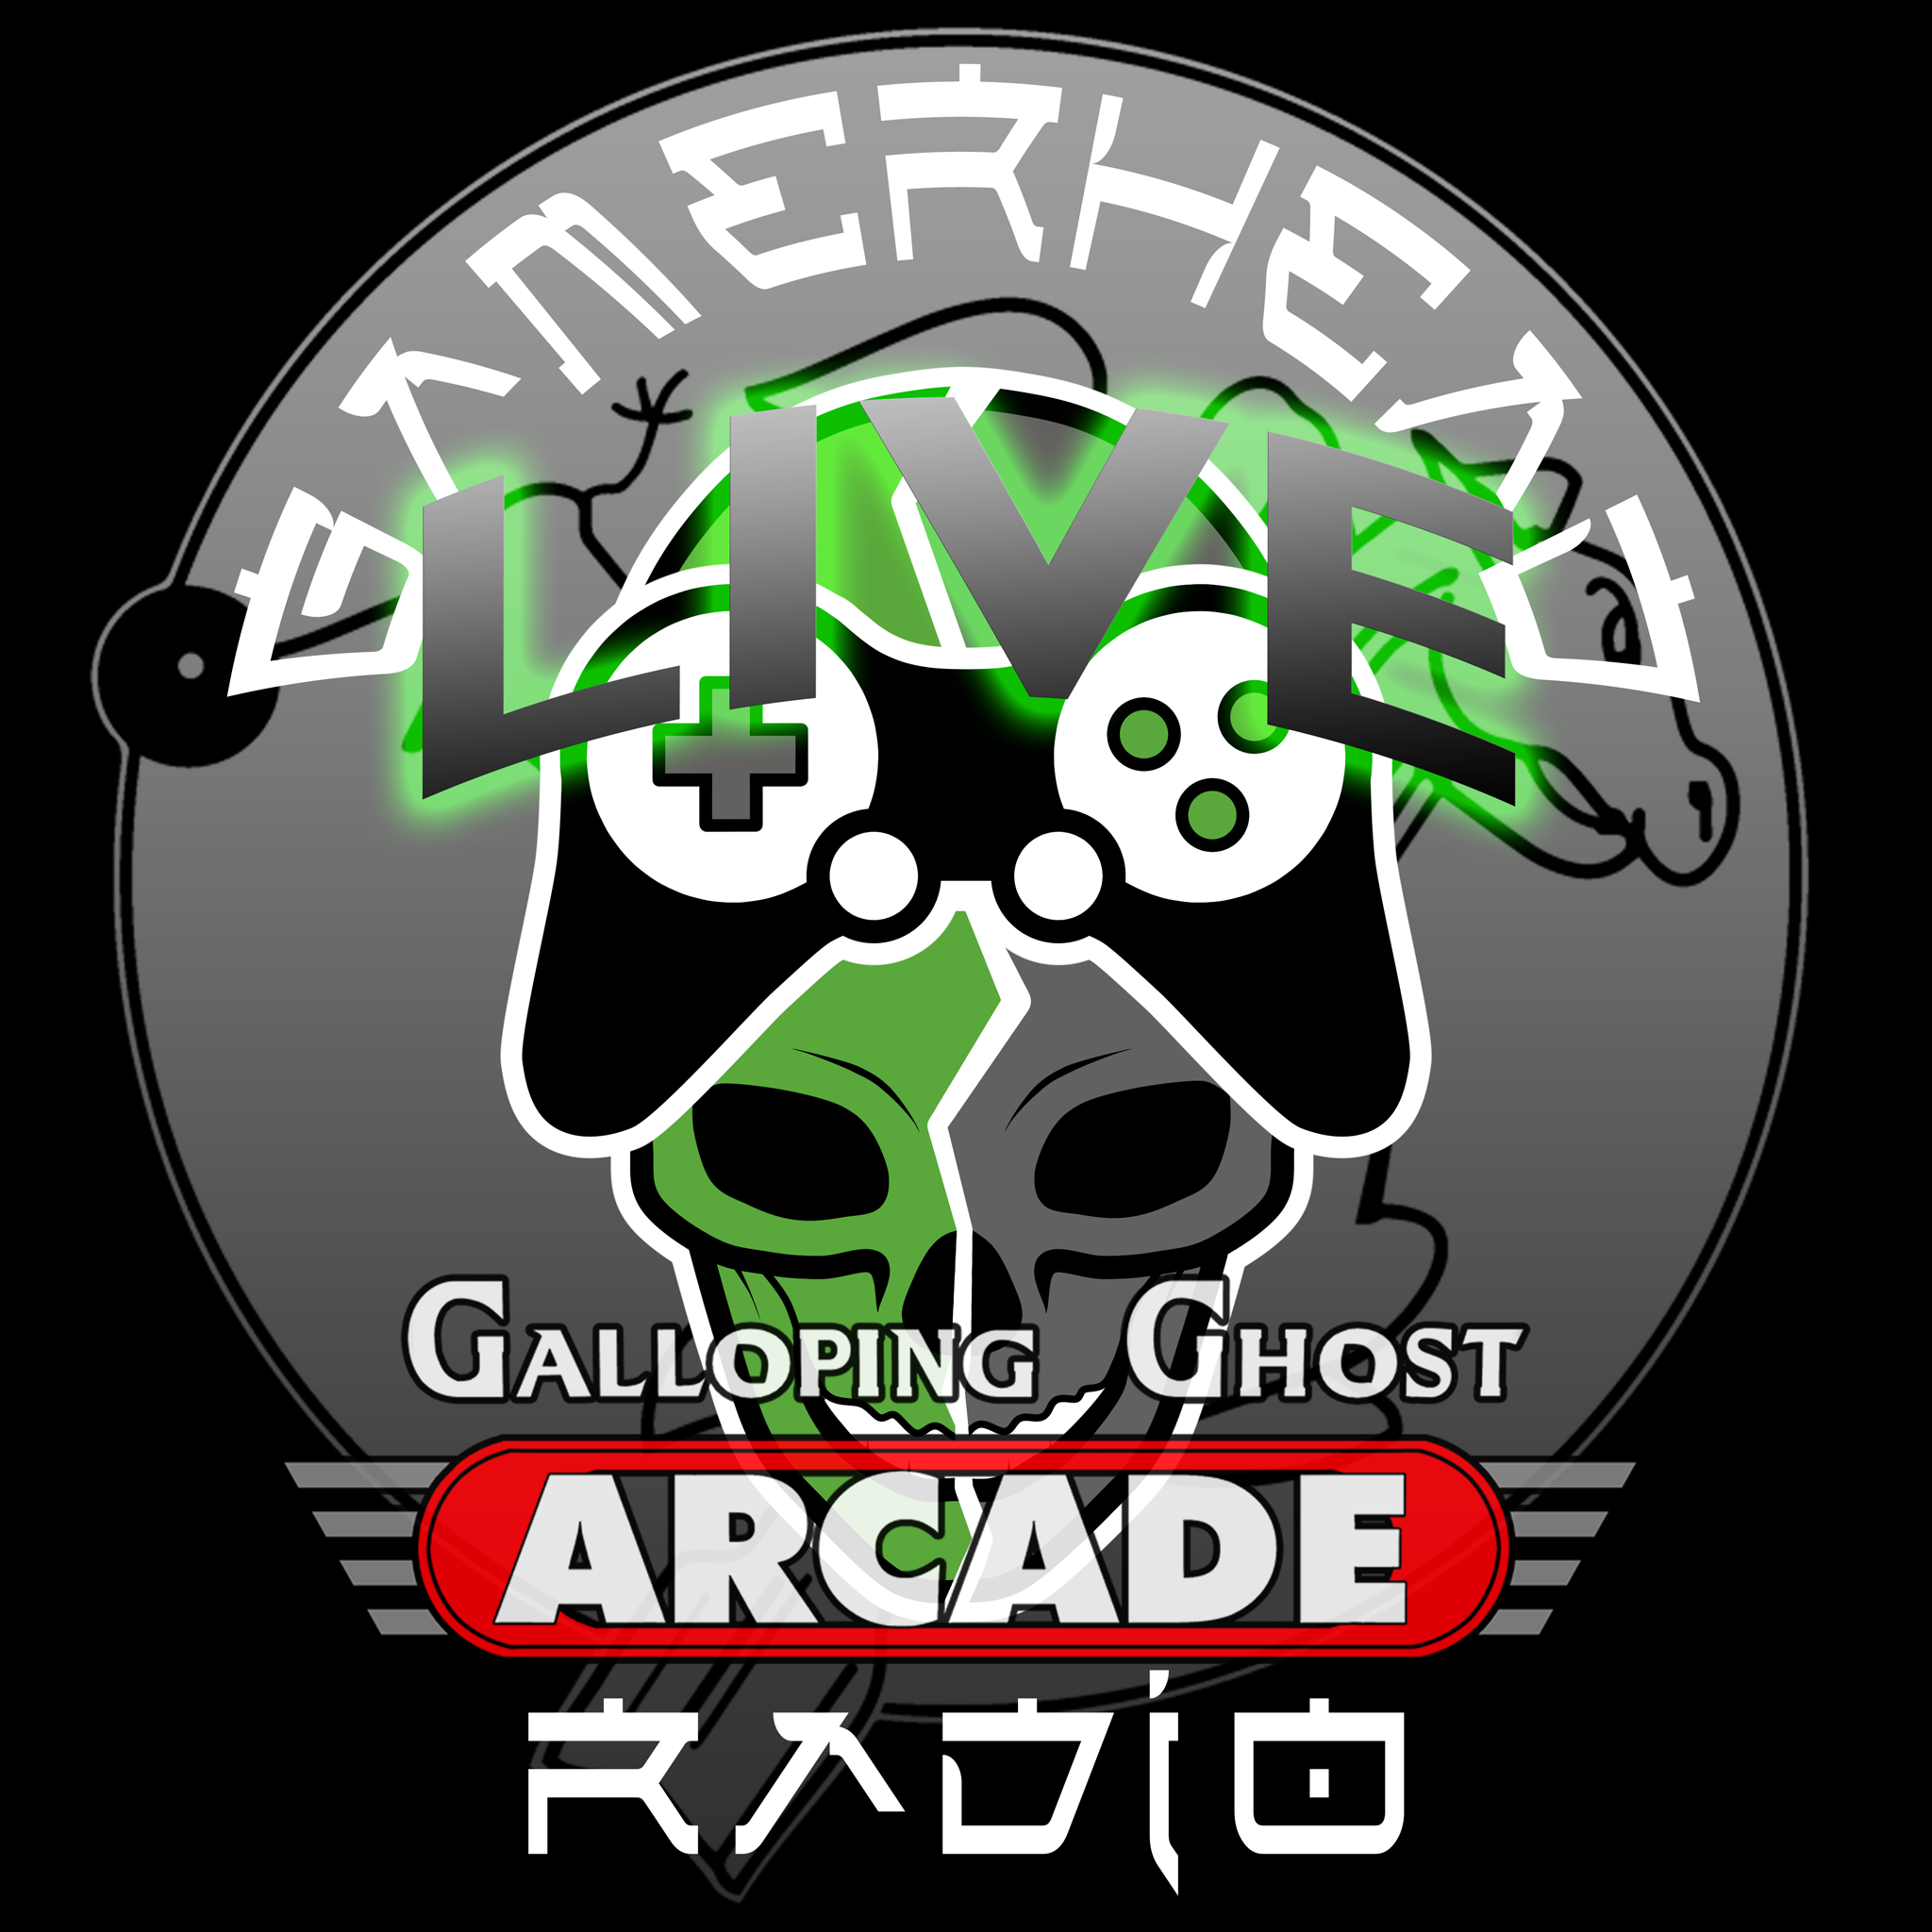 Episode 113 - LIVE at the Galloping Ghost Arcade